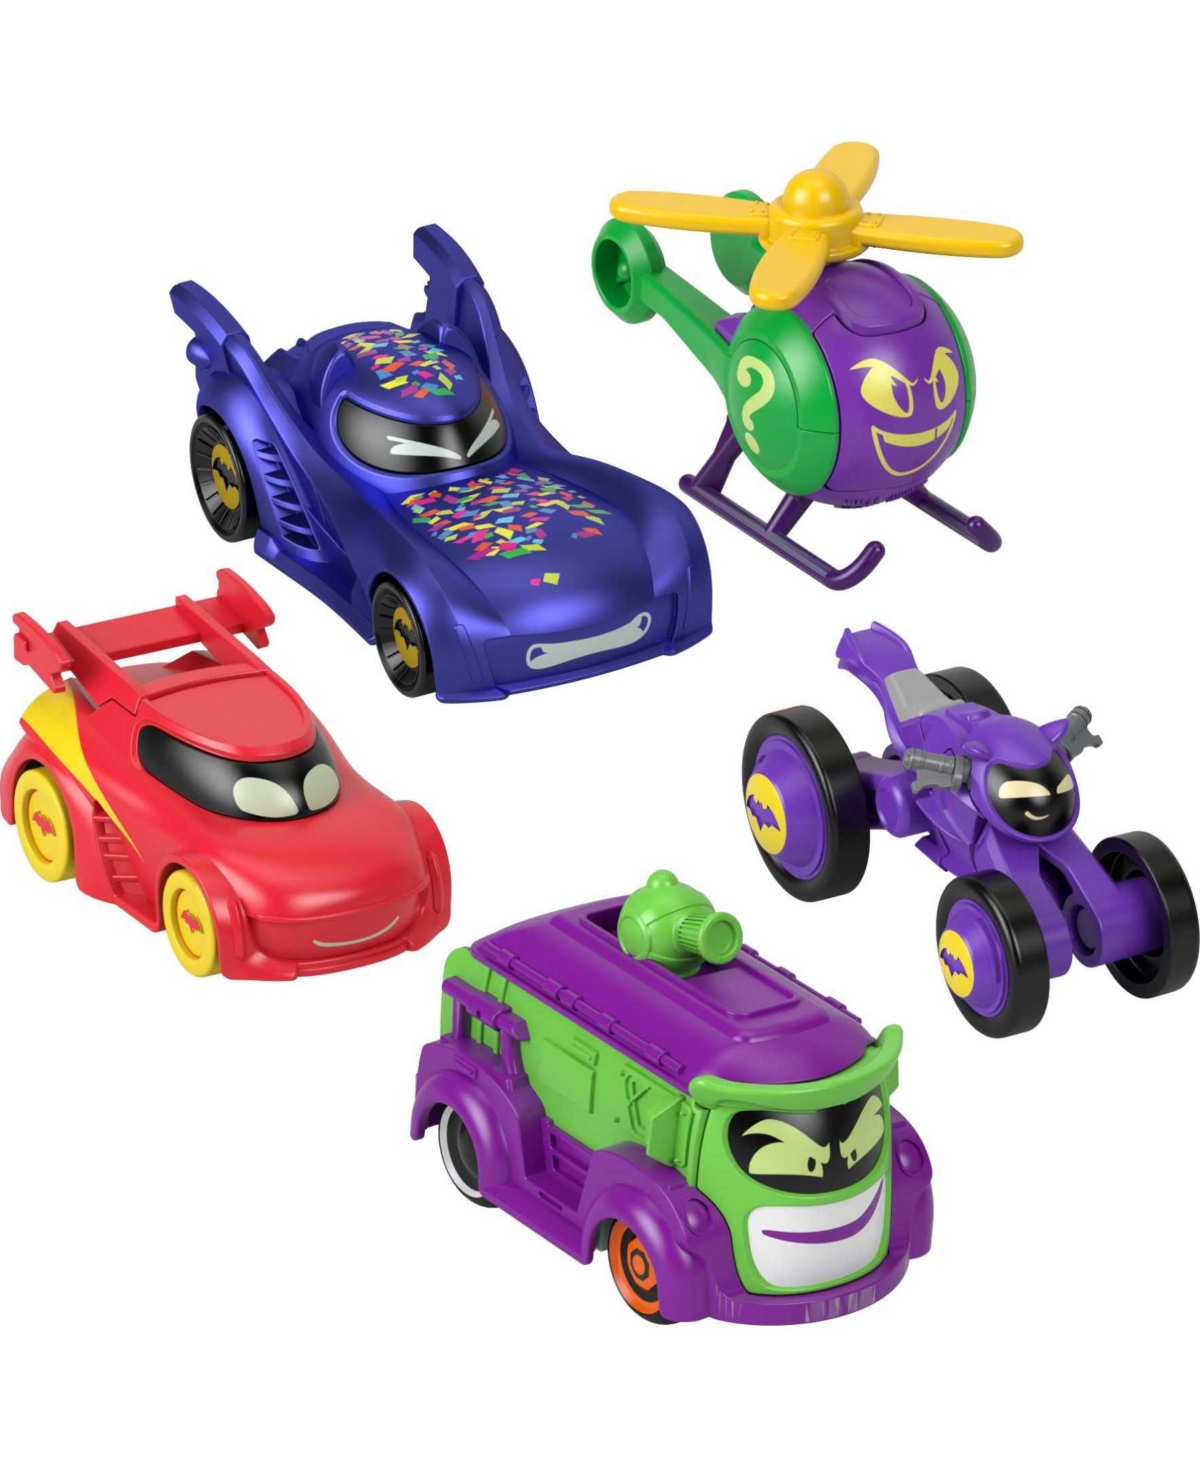 Batwheels Kids' Fisher-price Dc  1:55 Scale Vehicle Multipack Batcast Metal Die Cast Cars, 5 Pieces In Multi-color